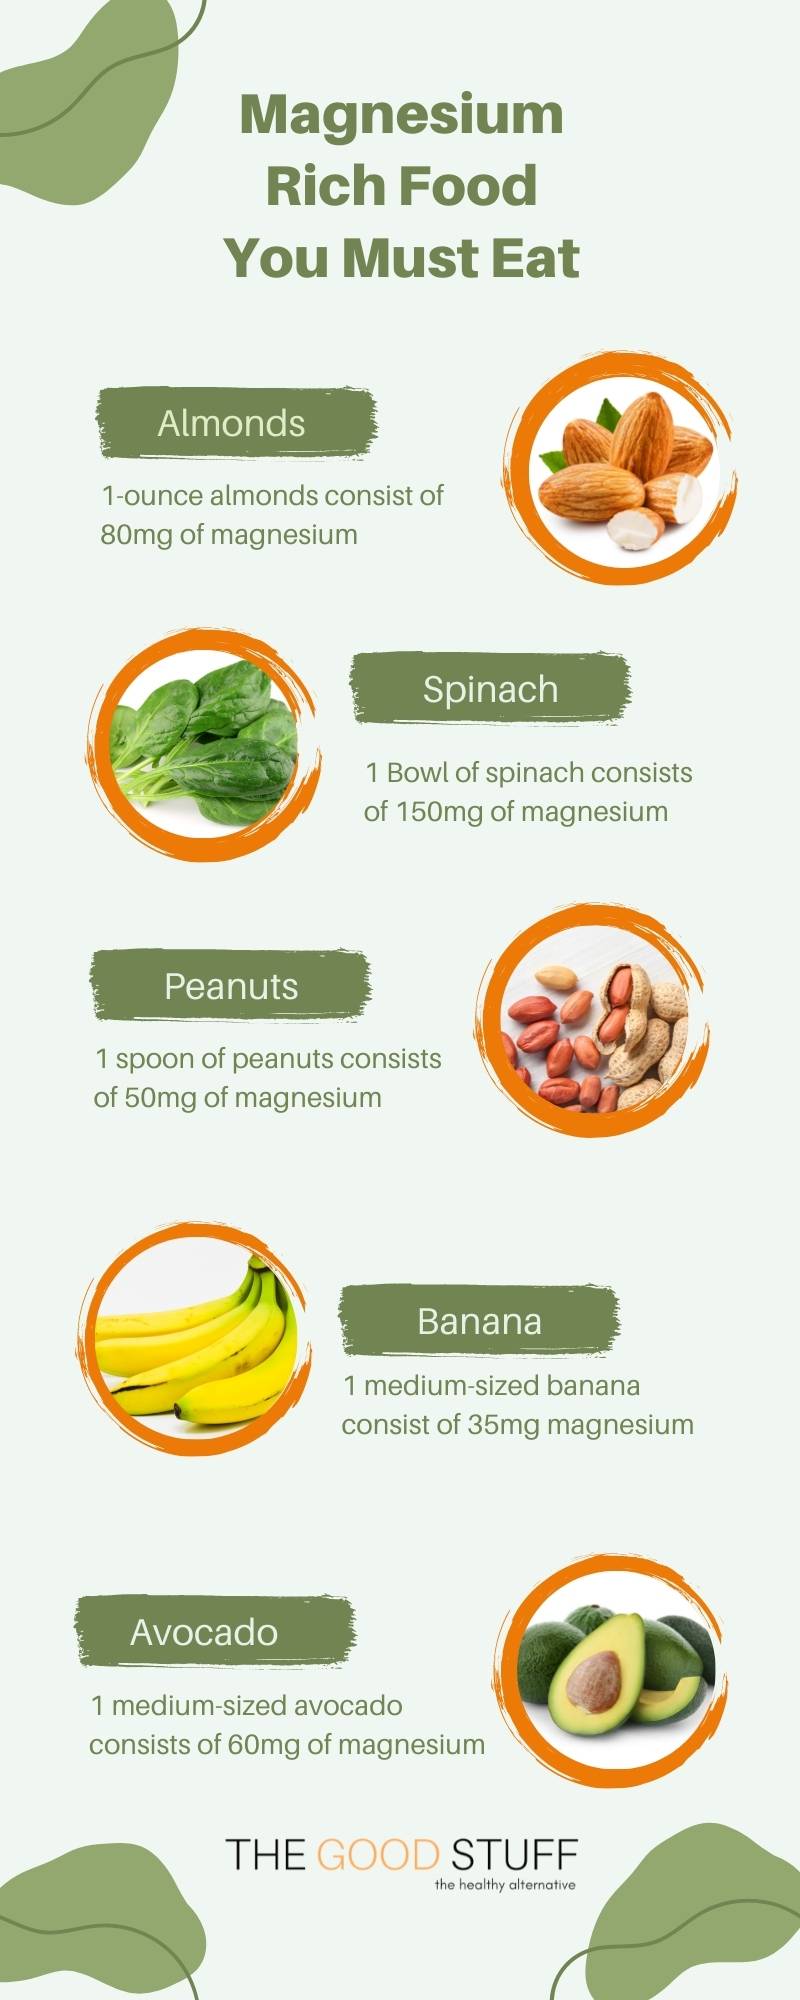 Some of the best foods to consume that are rich in Magnesium to optimise your health and well-being. Learn more about the benefits of magnesium with The Good Stuff Health Shop.